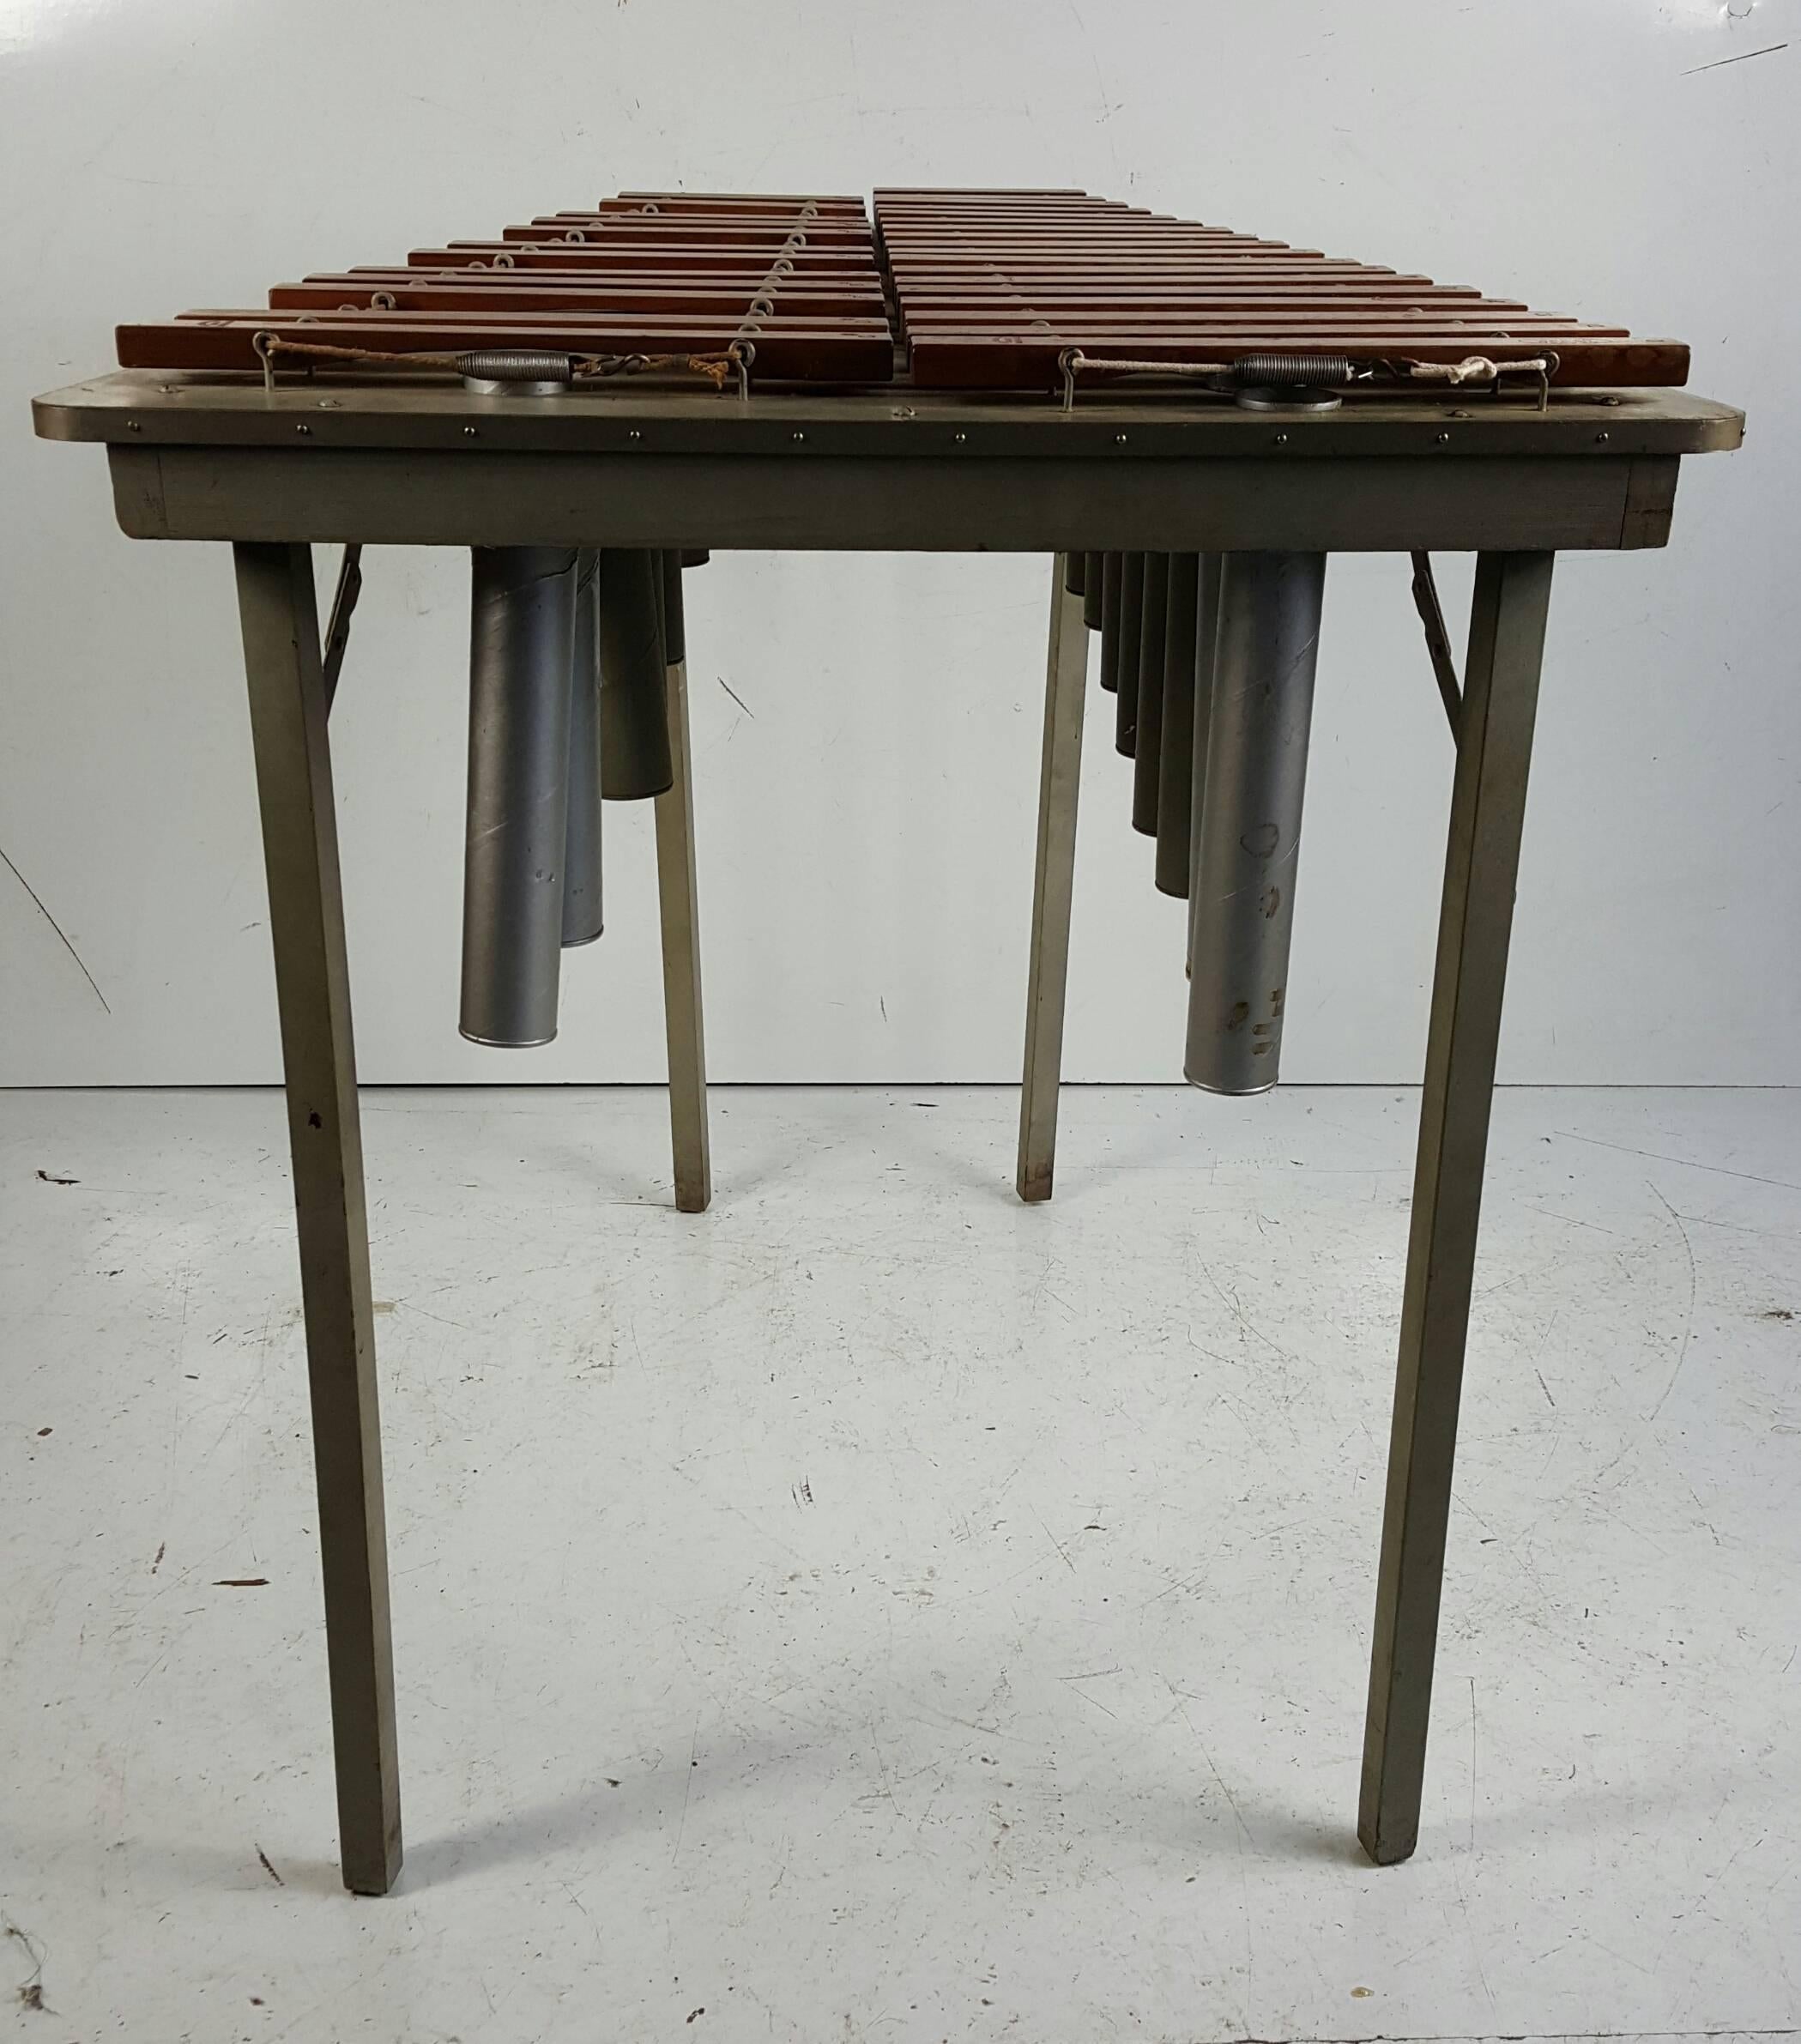 1940s Portable Deagan Marimba,, Rosewood bars,Beautiful warm rich sound /tone.

The Marimba originated in Africa and consisted of bars of resilient wood mounted over gourds and were used by the natives of Africa as war drums. The African Marimba